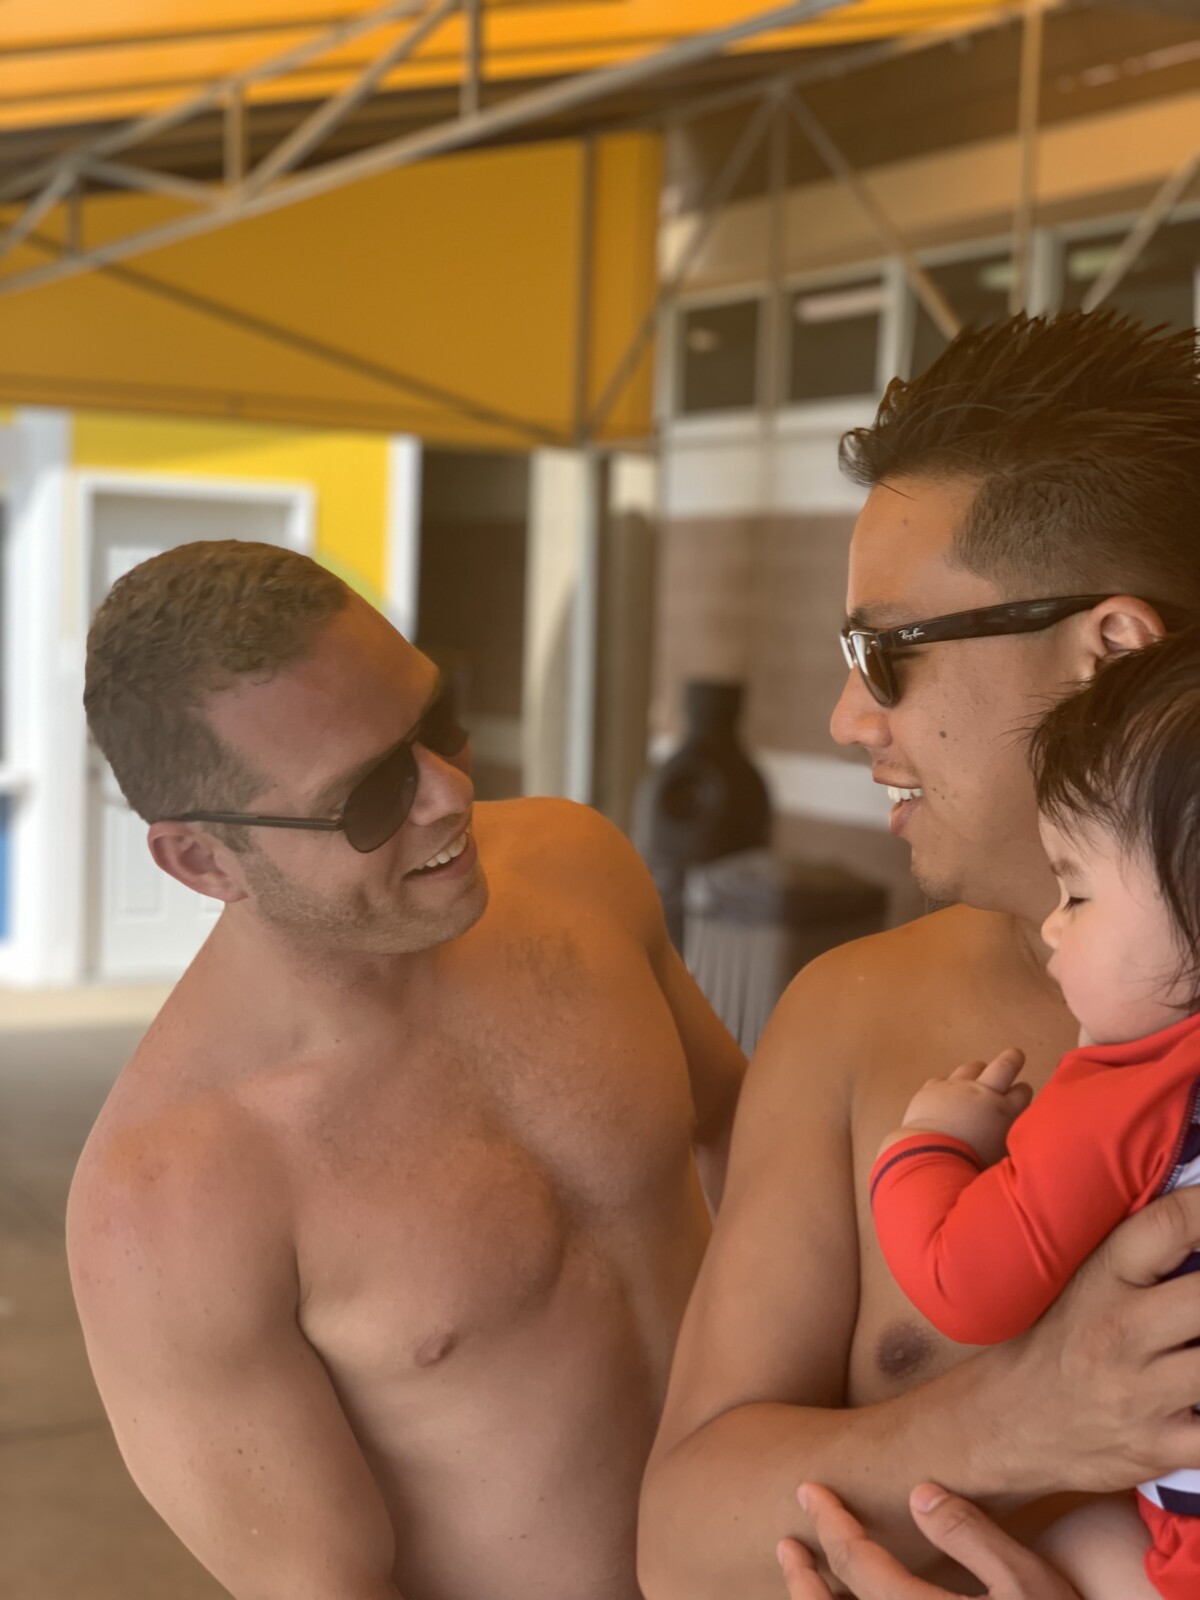 David, Richie and Leilani (our niece) at the waterpark.